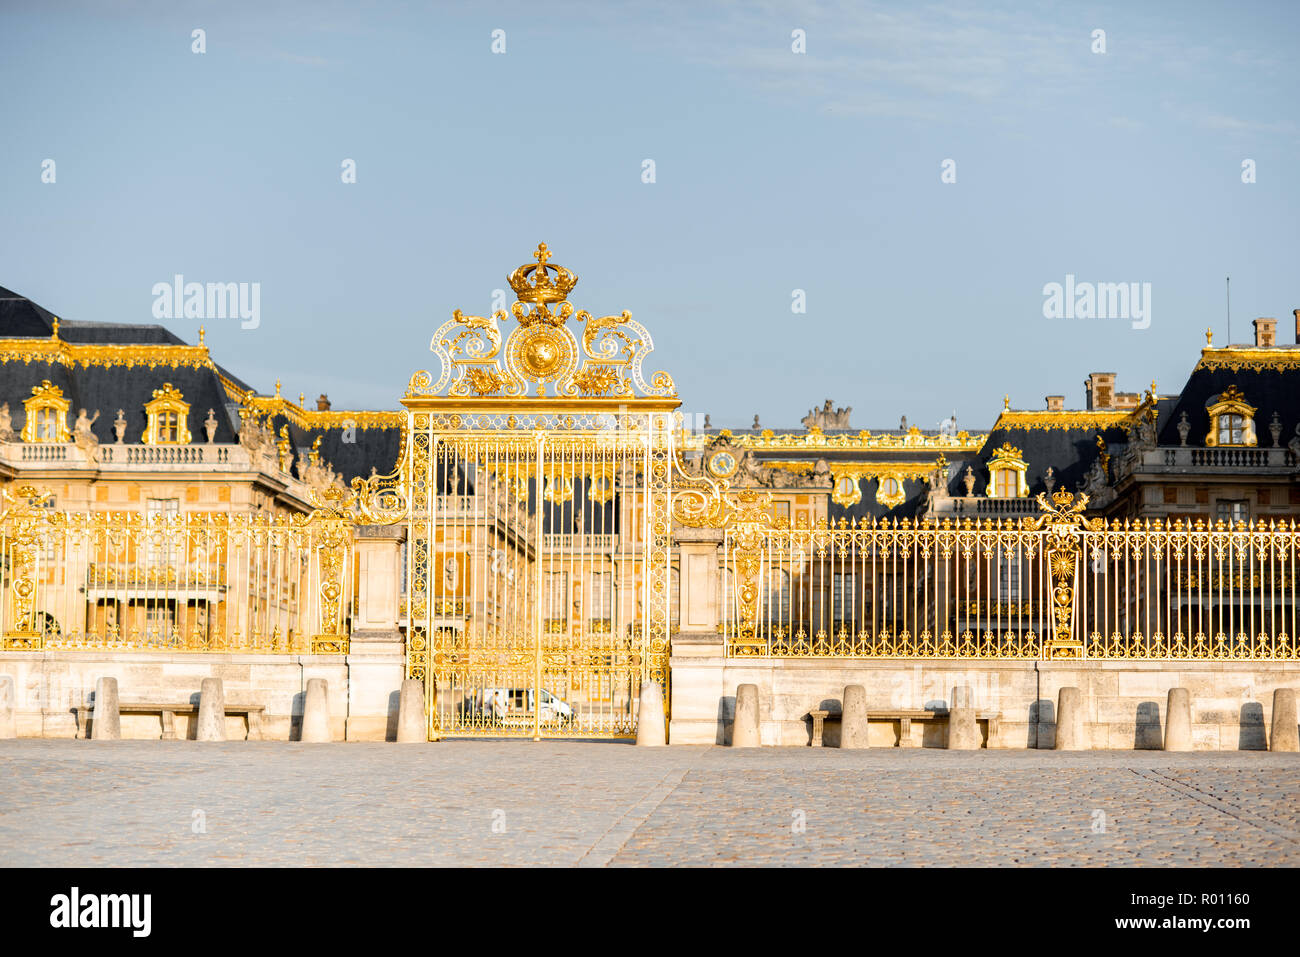 The golden gate of the palace of Versailles in France Stock Photo